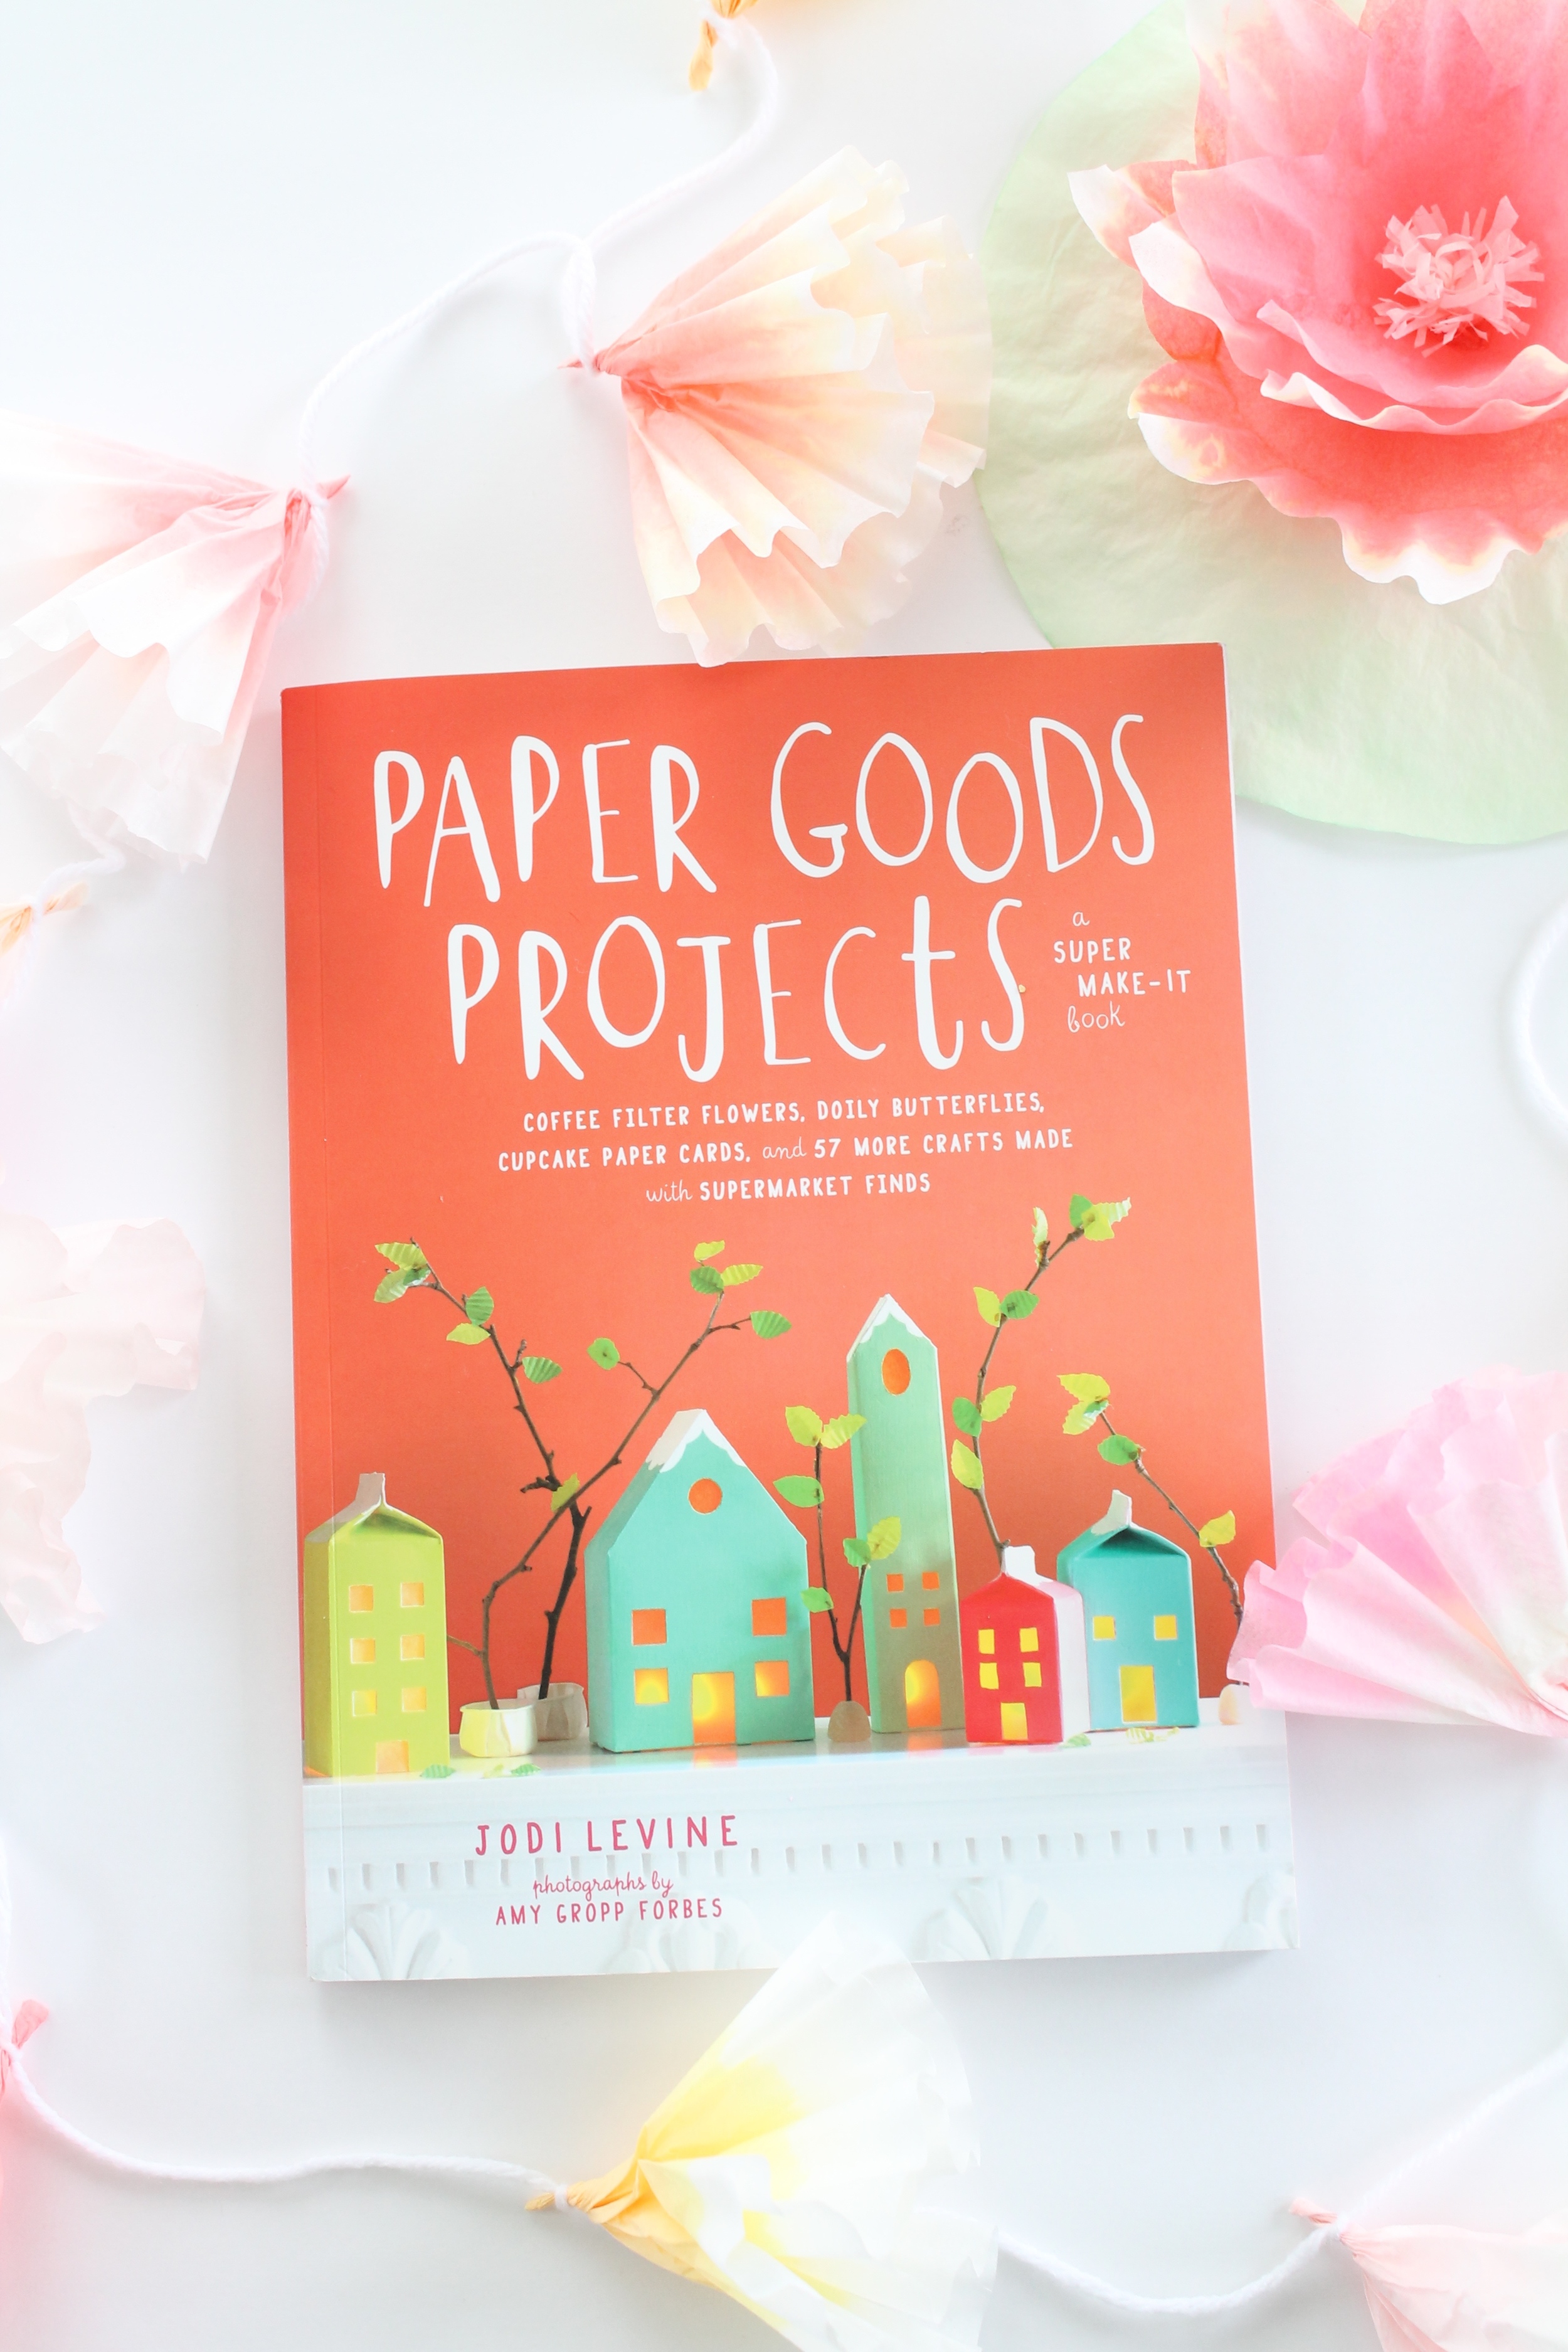 Book "Paper Goods Projects" by Jodi Levine. Full of fabulous, easy and inexpensive paper projects. My absolute favorite are the coffee filter flowers. So pretty and delicate!